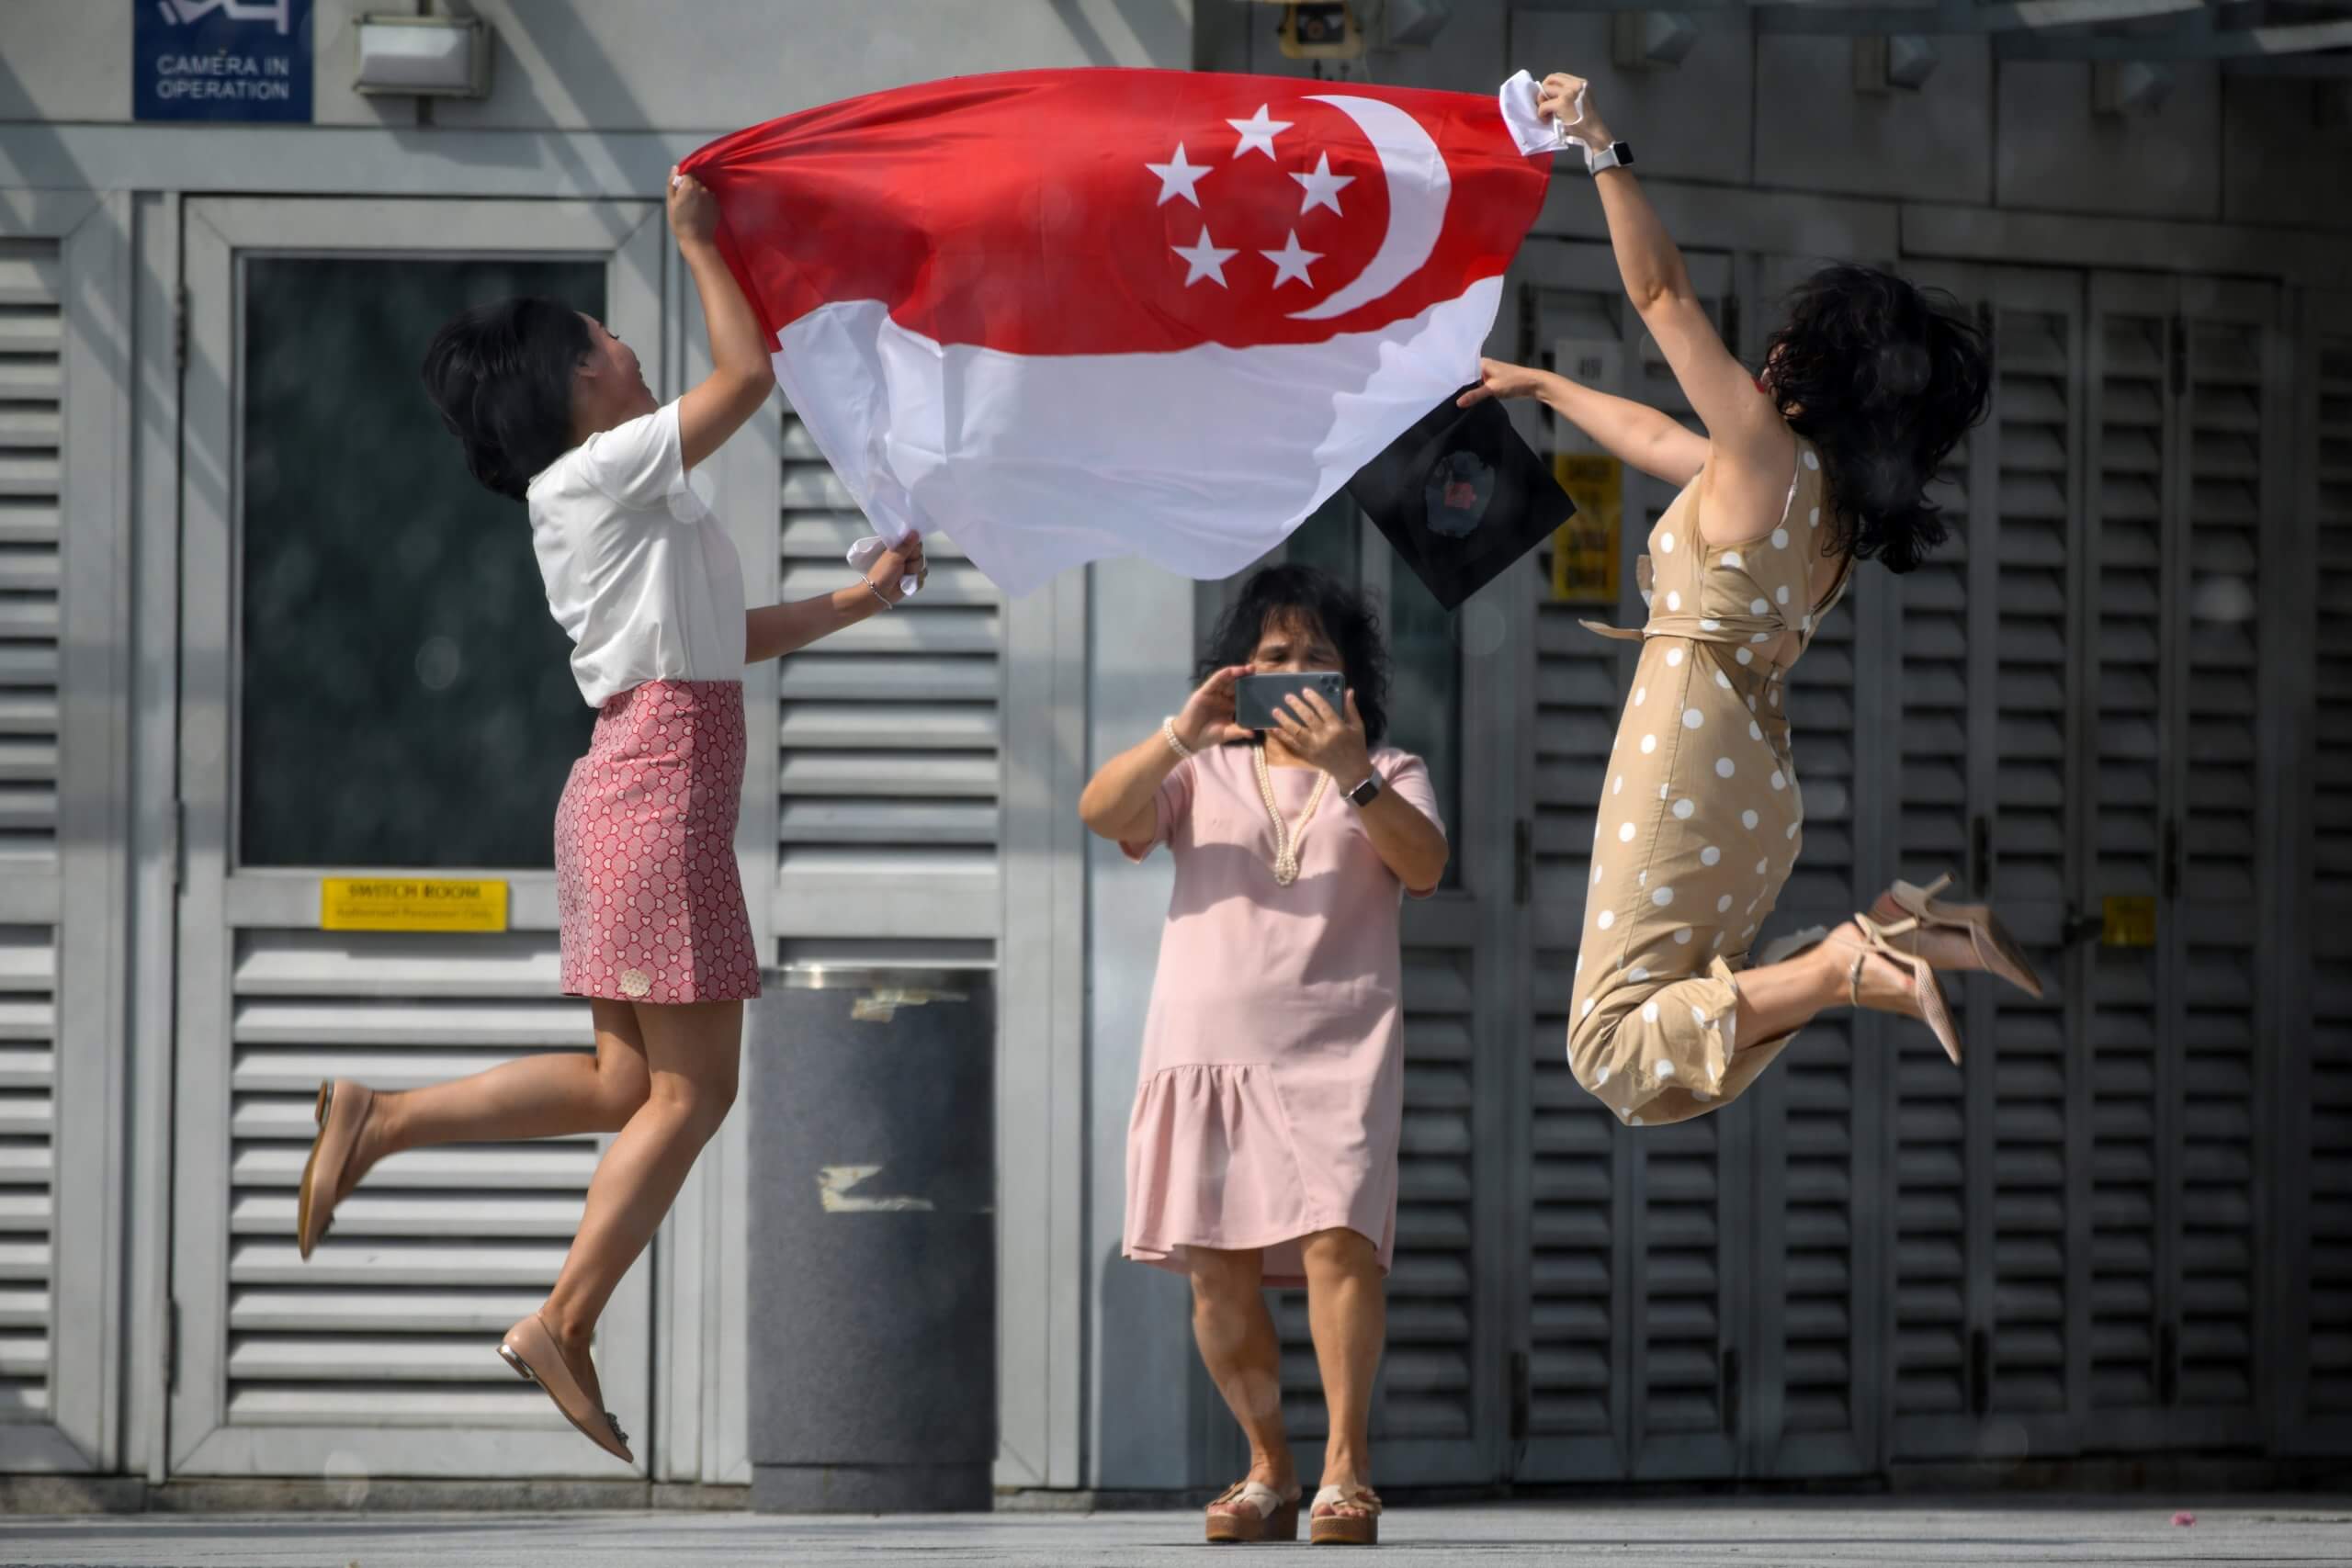 Singapore Student's Pass: What international students should know